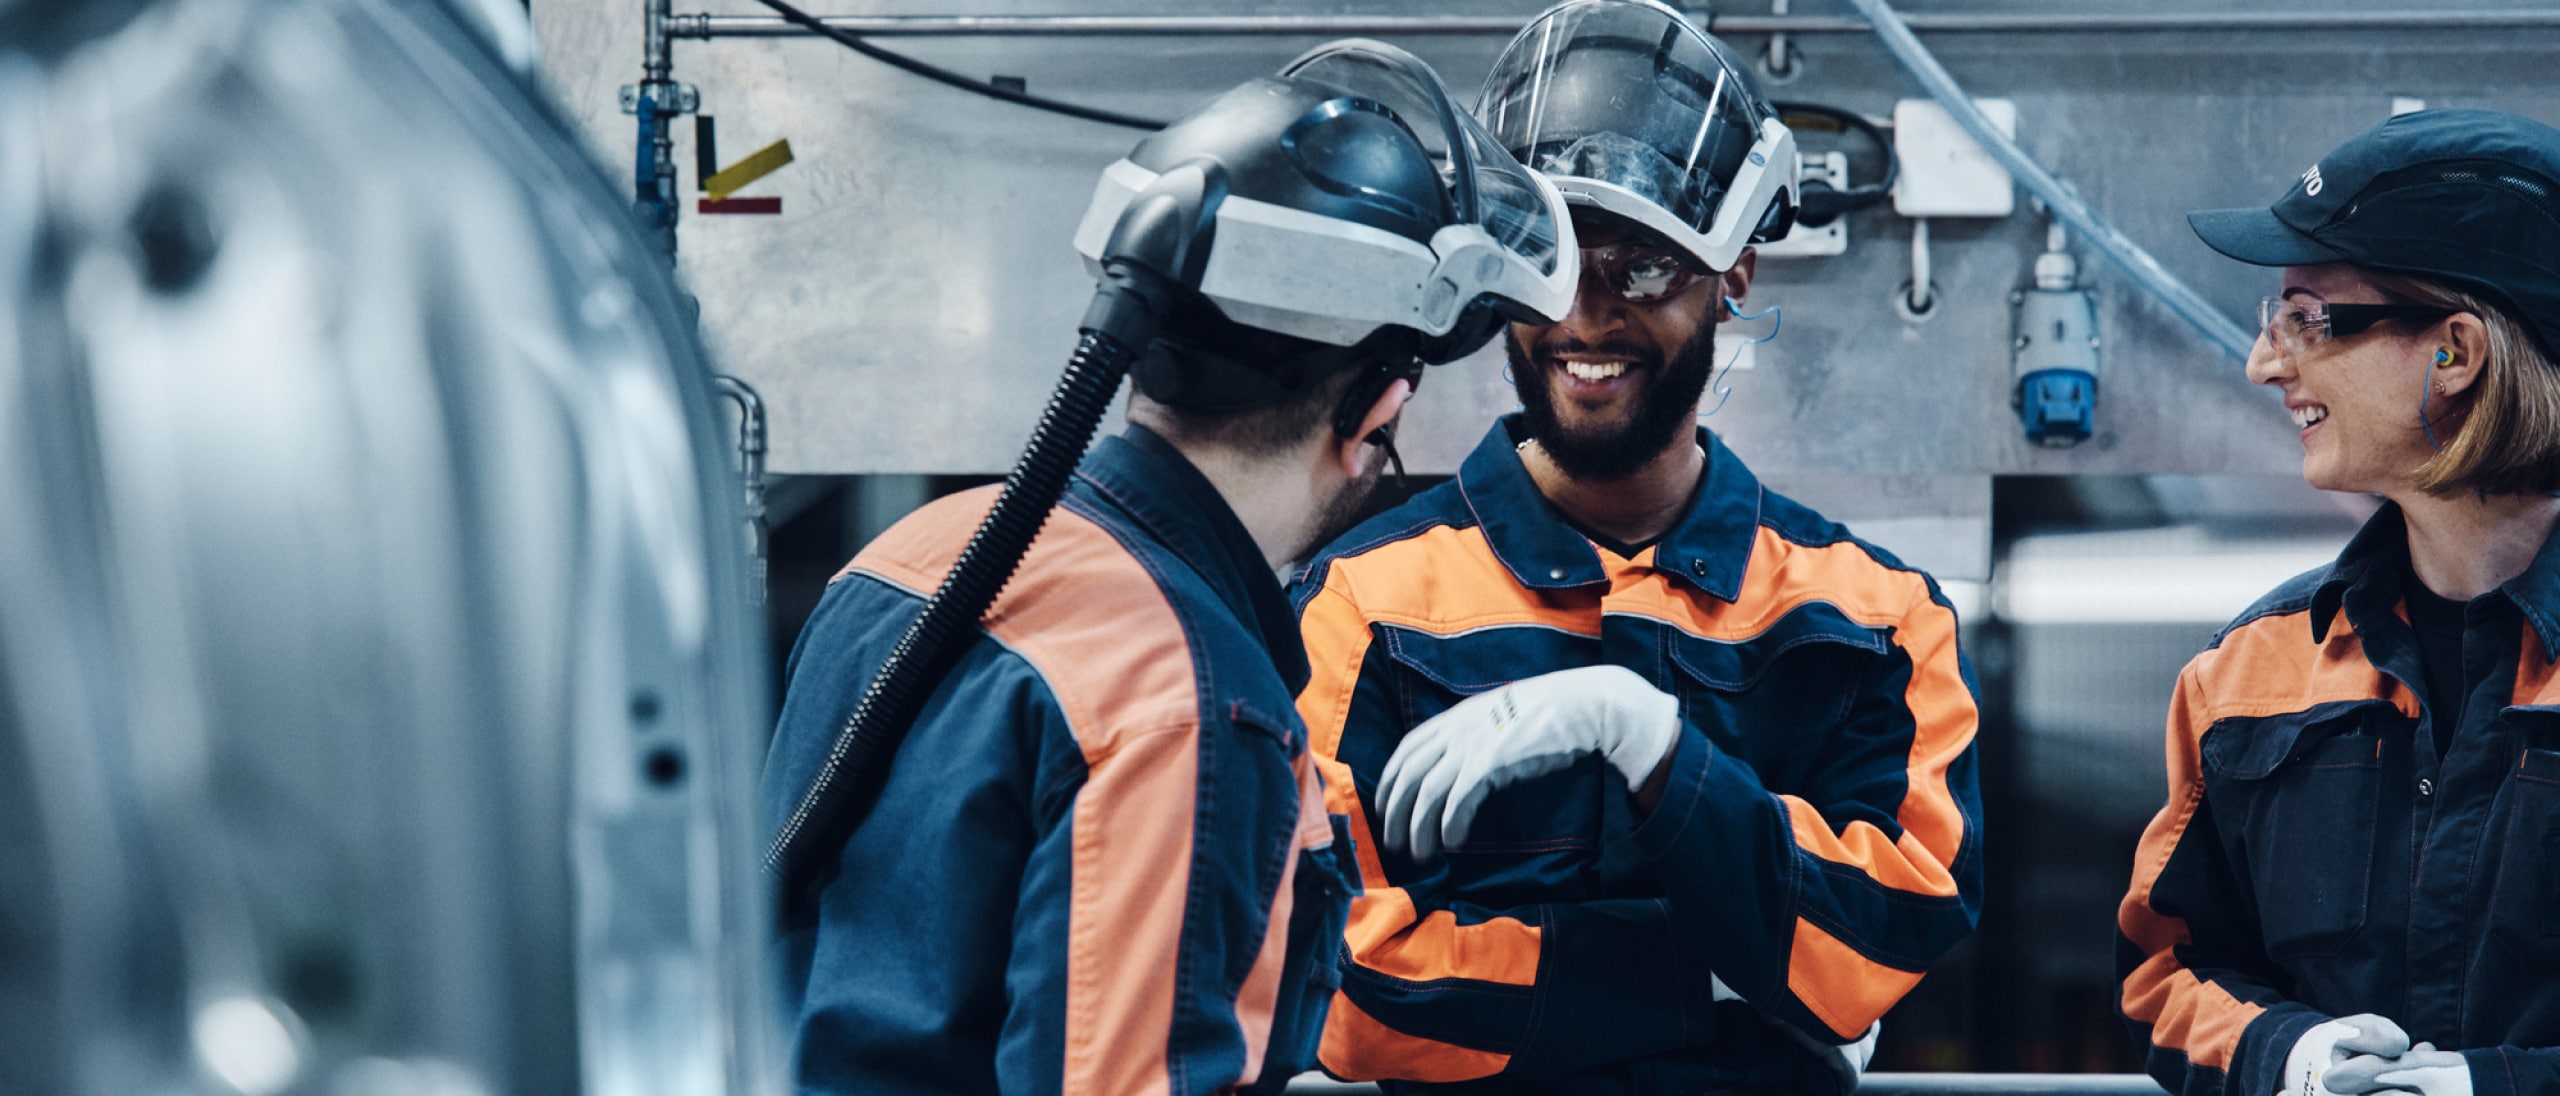 Three people having a chat wearing safety gear and work overalls.